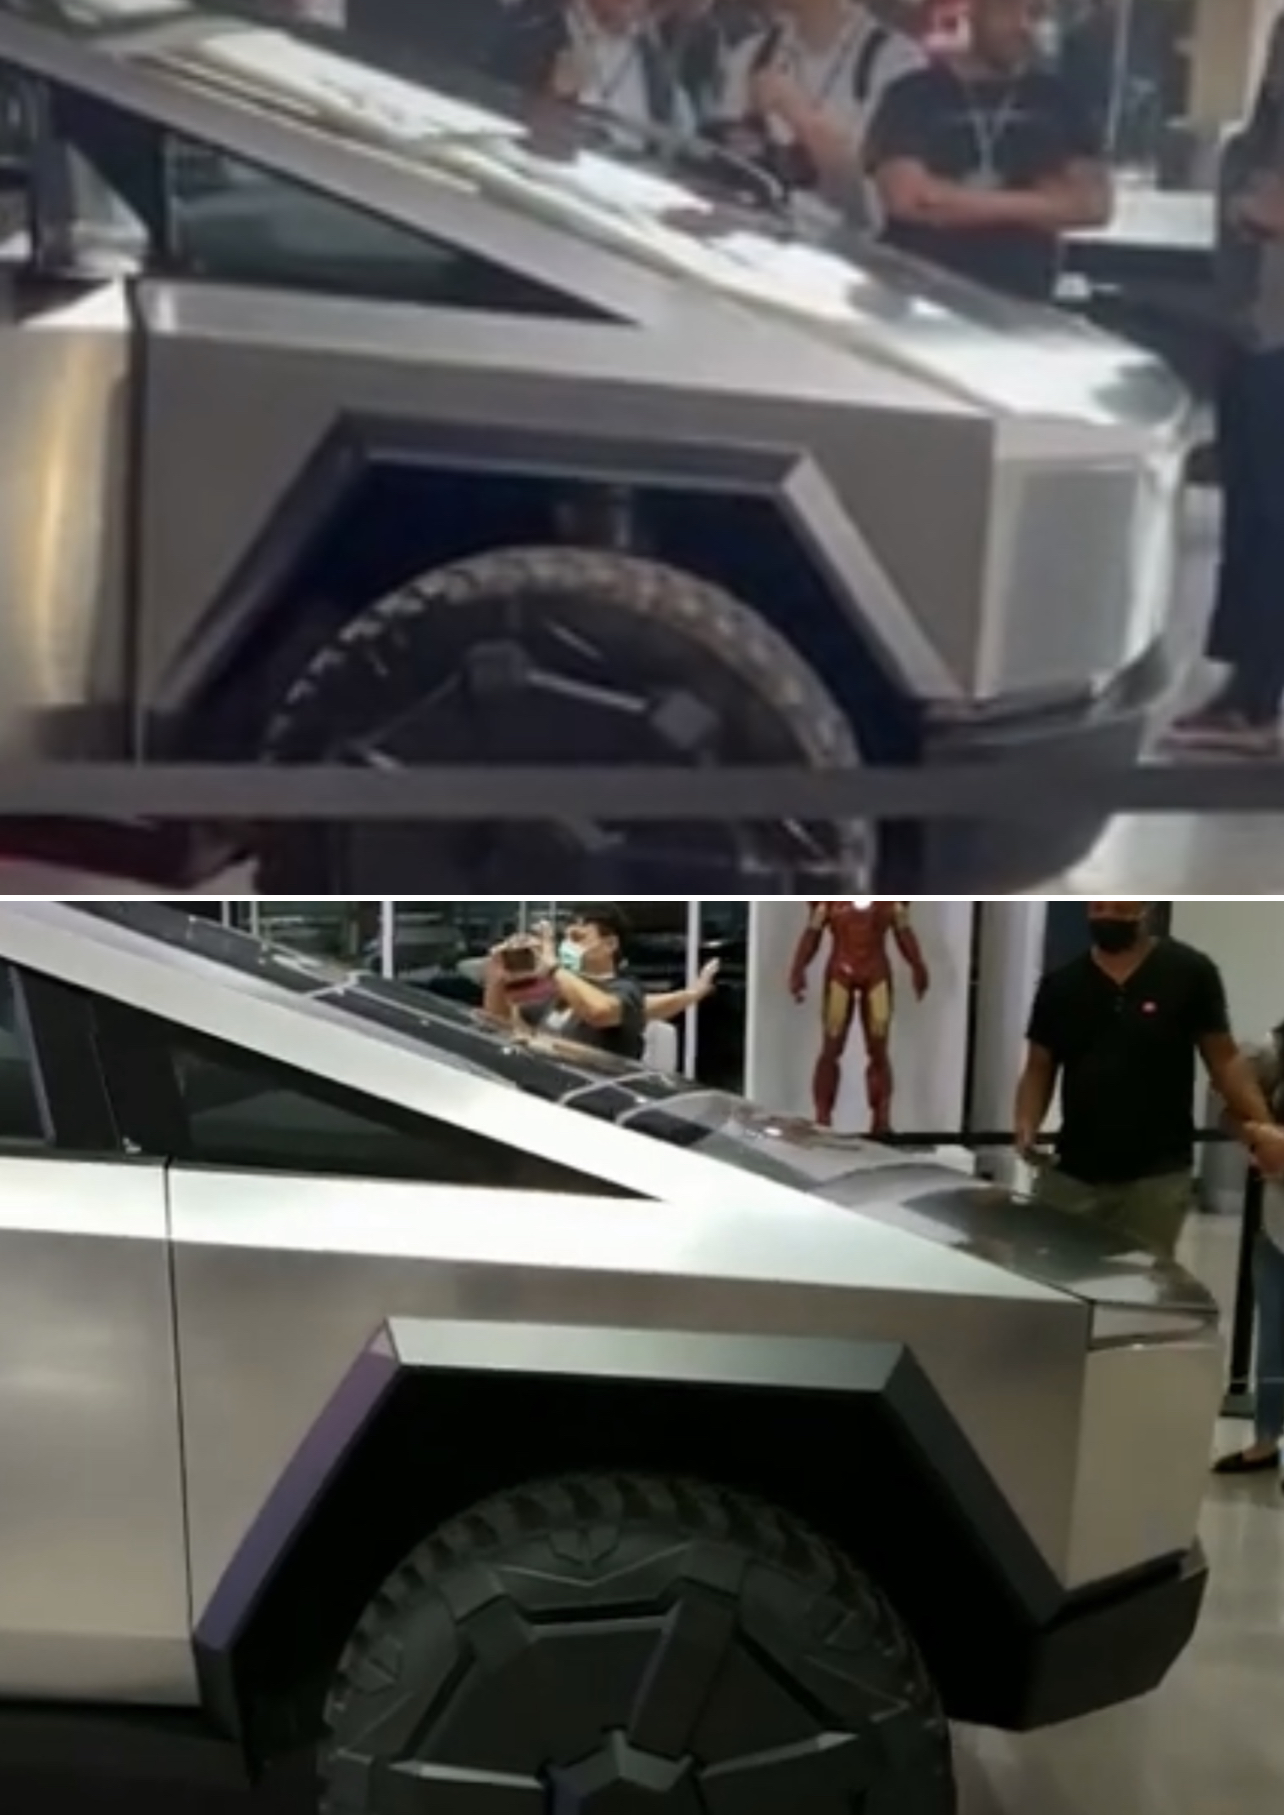 Tesla Cybertruck New leaked video! Many Cybertrucks production completed w/ new wheel design + finished frunks! 9C6E7E39-7760-43C3-A571-D26BF0CE6DD4